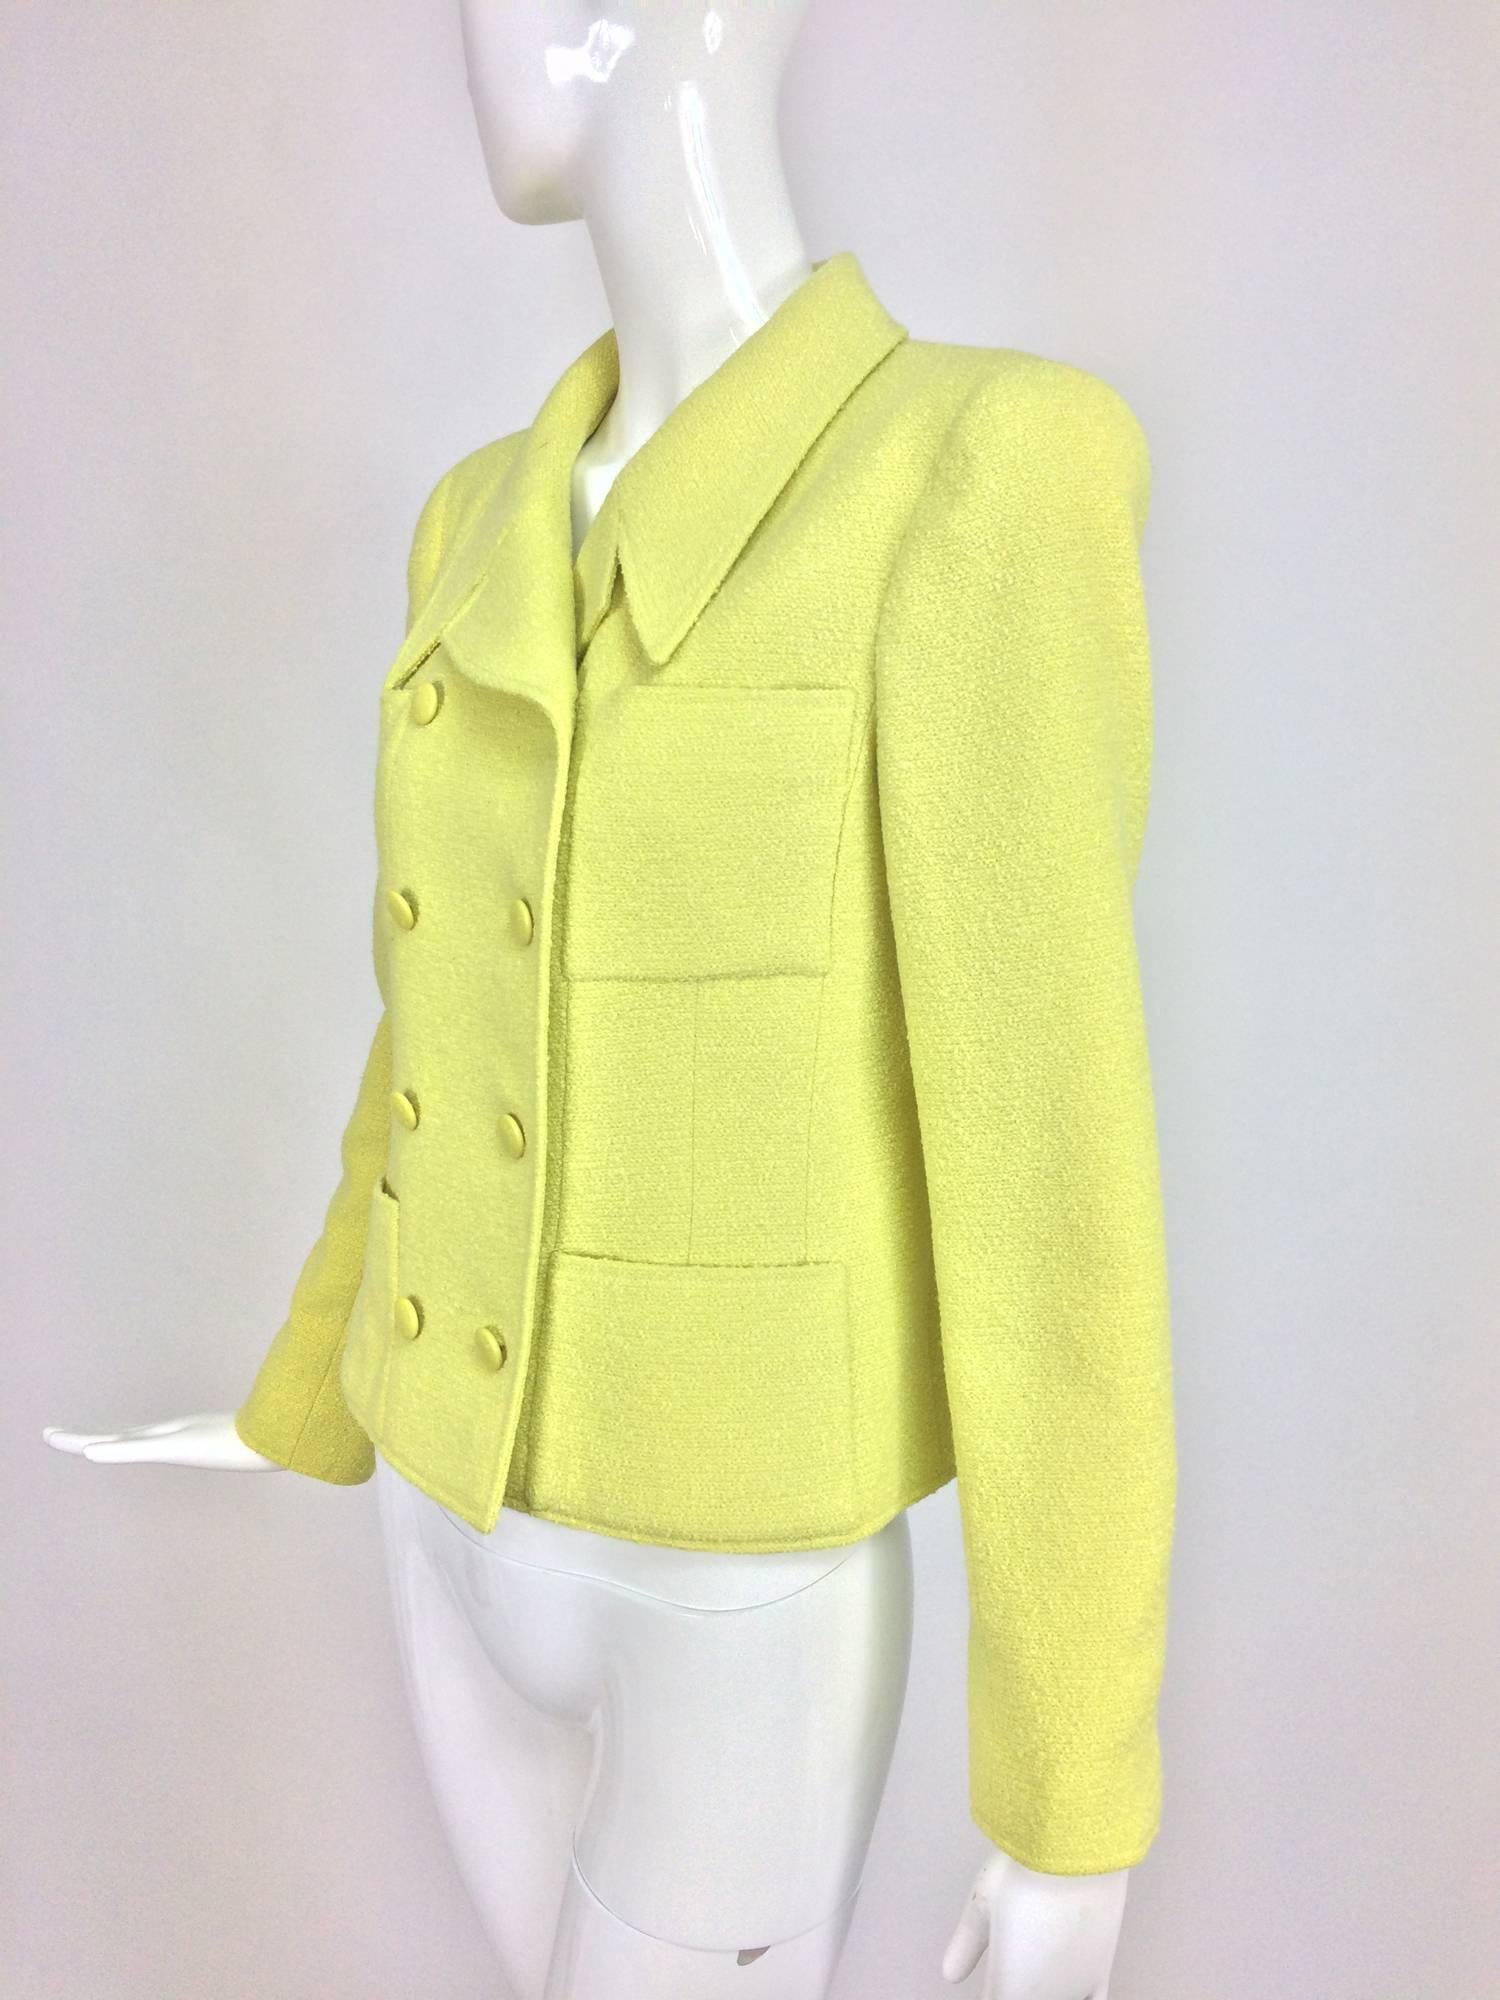 Vintage Chanel lemony yellow boucle double breasted jacket 1990s 40...Double breasted jacket with four patch pockets, notched lapel collar...Yellow Chanel logo buttons...Three buttons at each cuff...Hip bone length jacket has princess seams and is